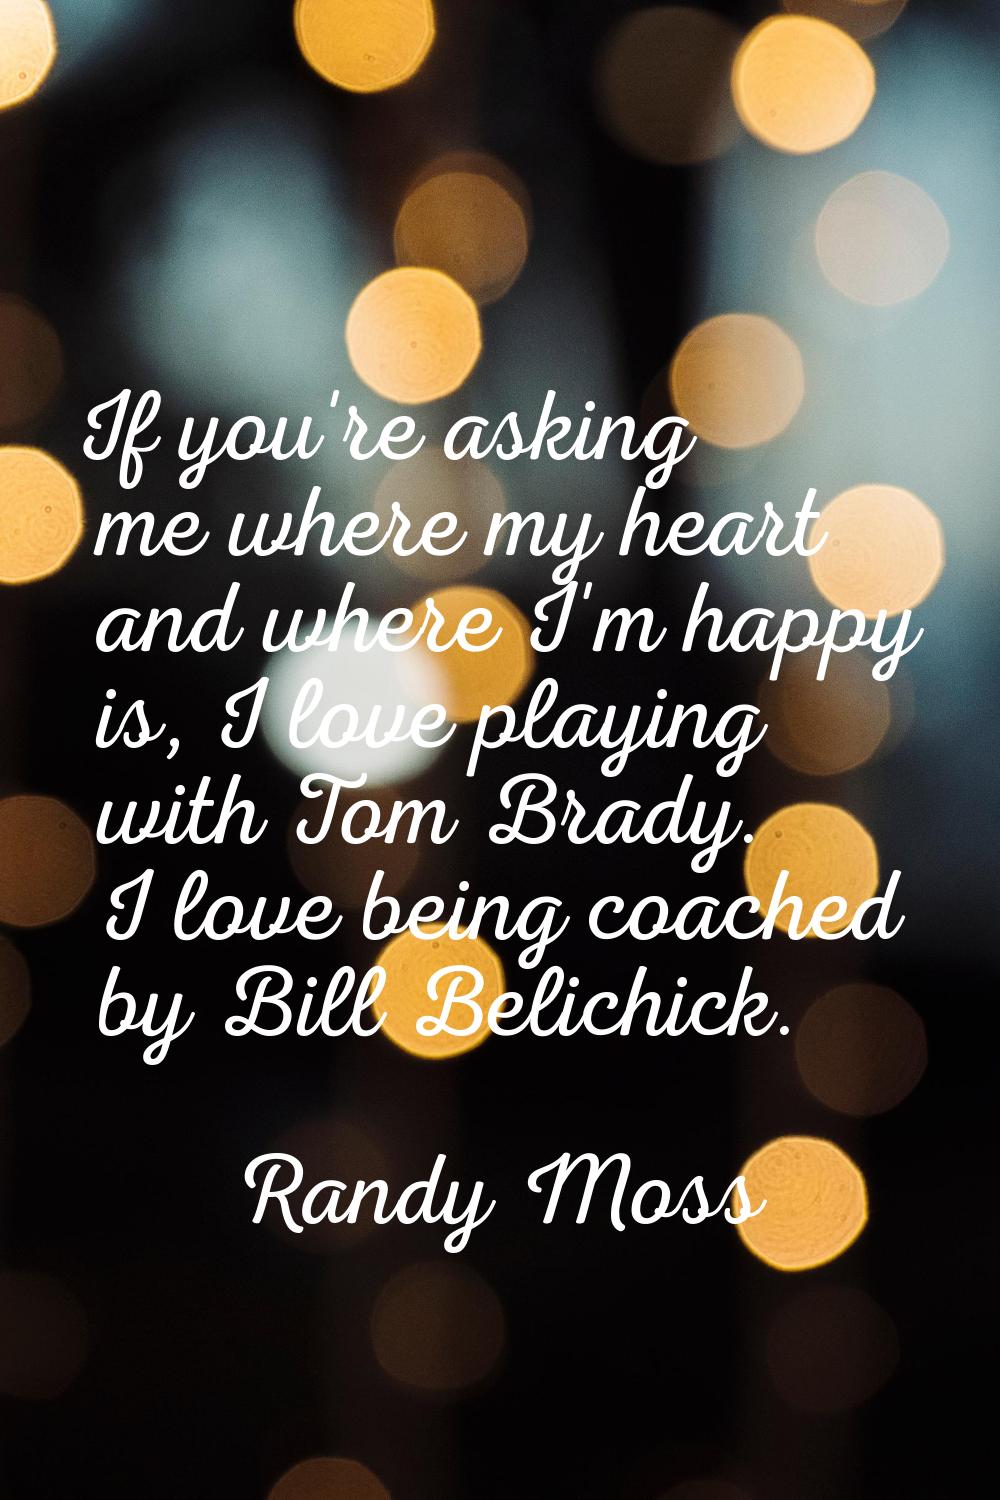 If you're asking me where my heart and where I'm happy is, I love playing with Tom Brady. I love be